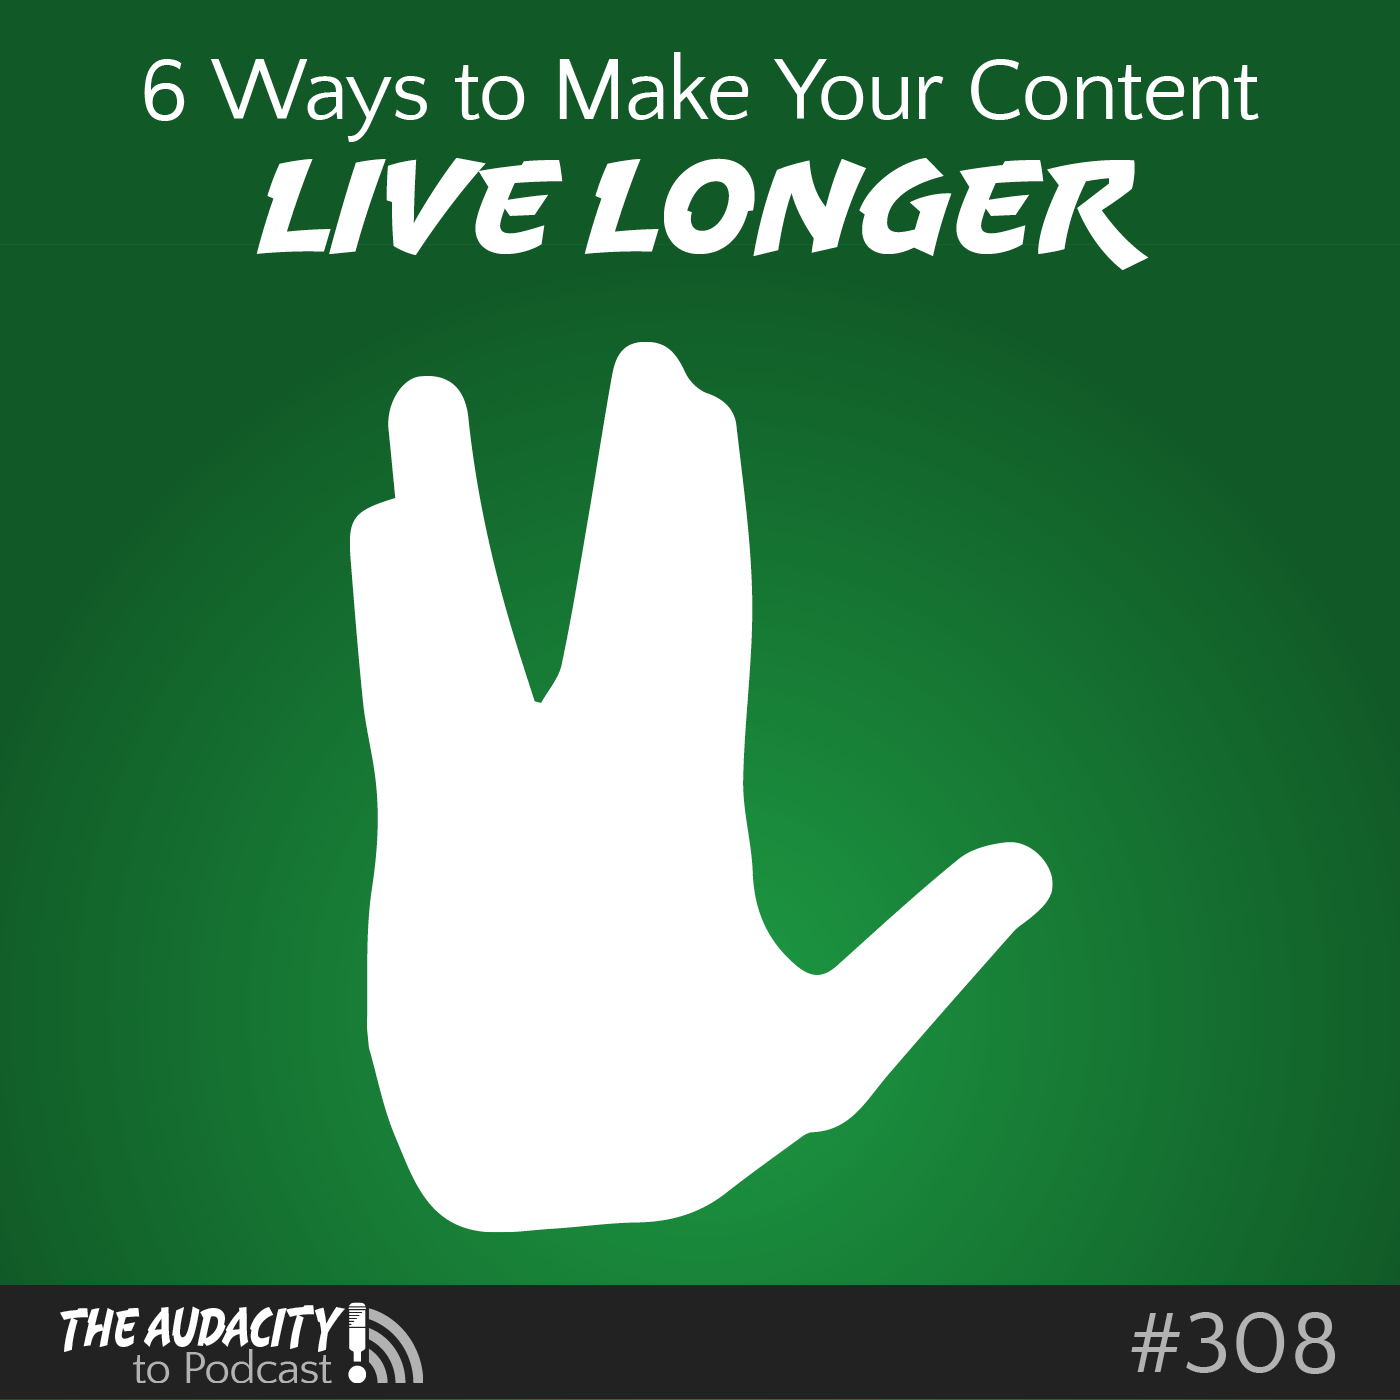 6 Ways to Make Your Content Live Longer